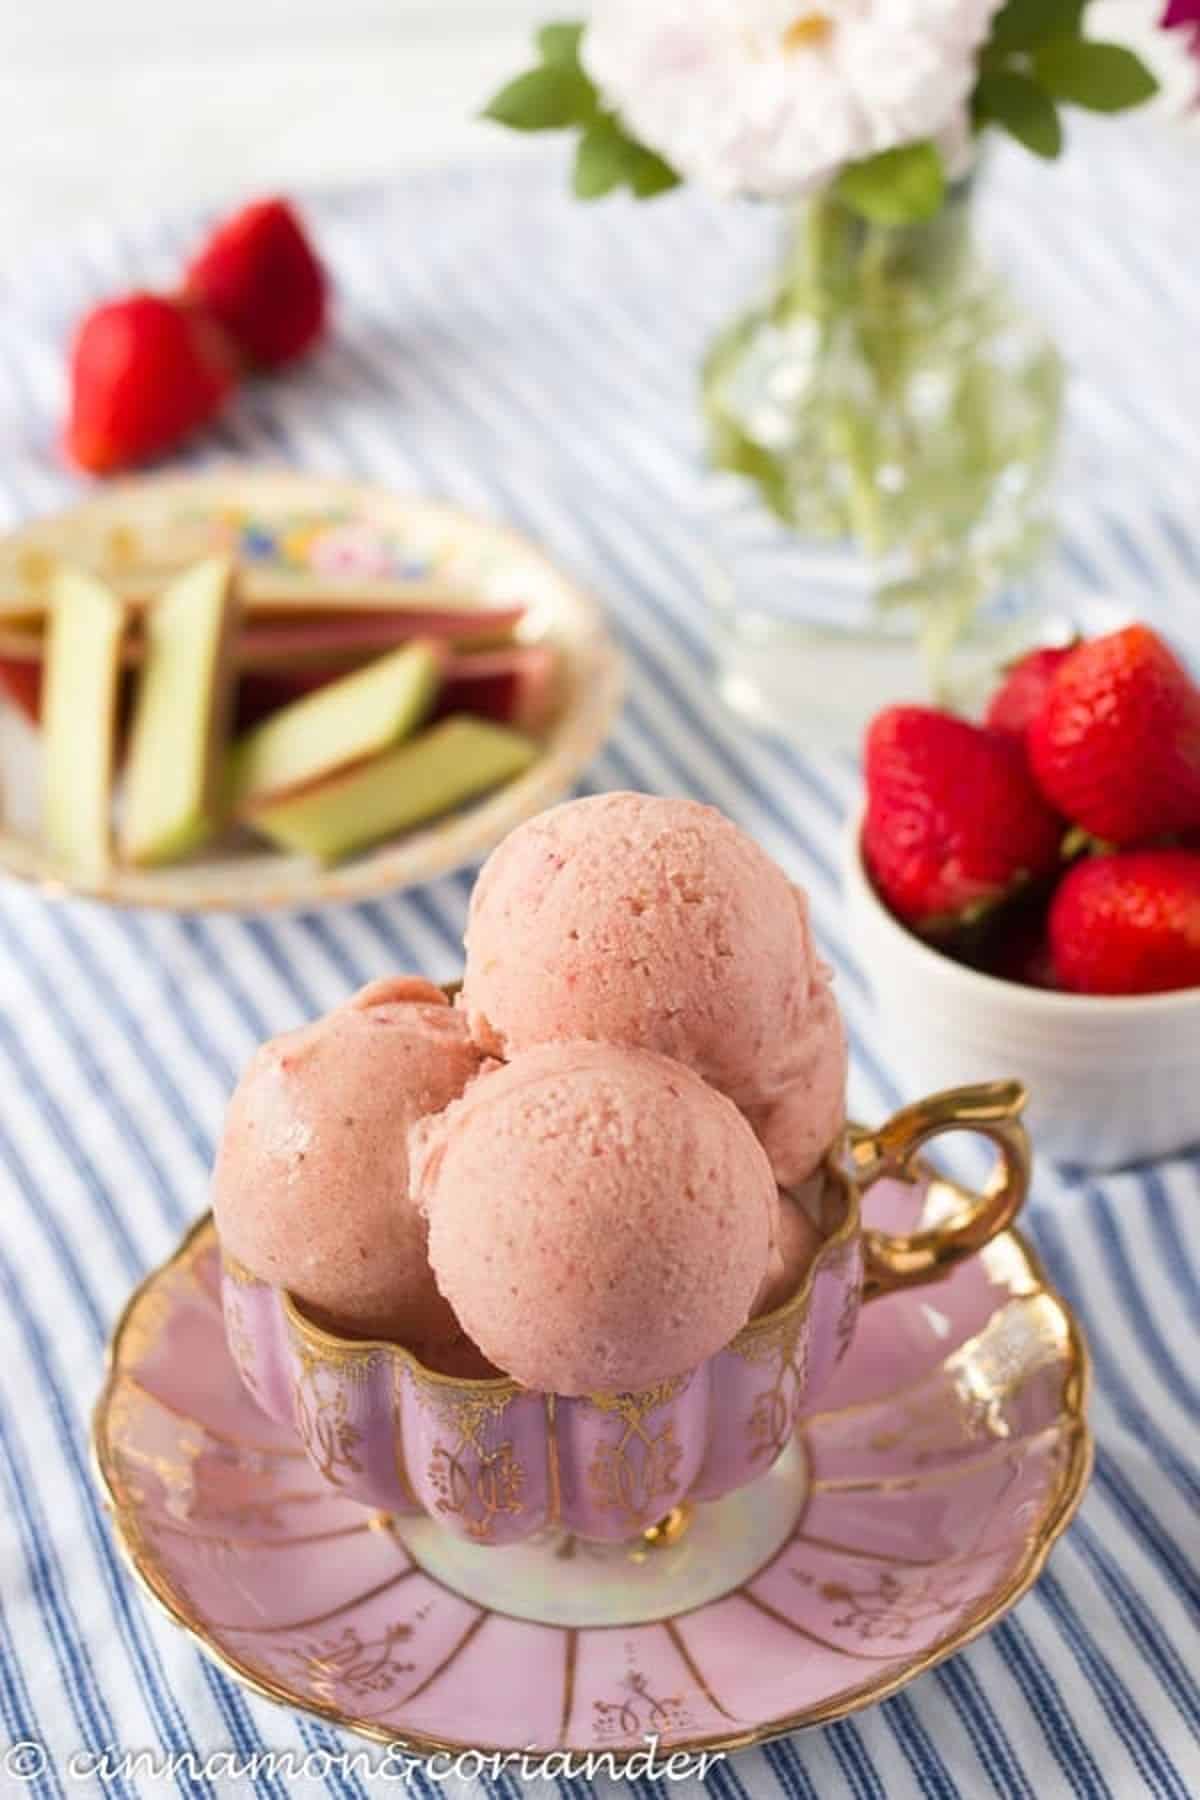 Strawberry Rhubarb Ice Cream scooped into a tea cup and saucer.